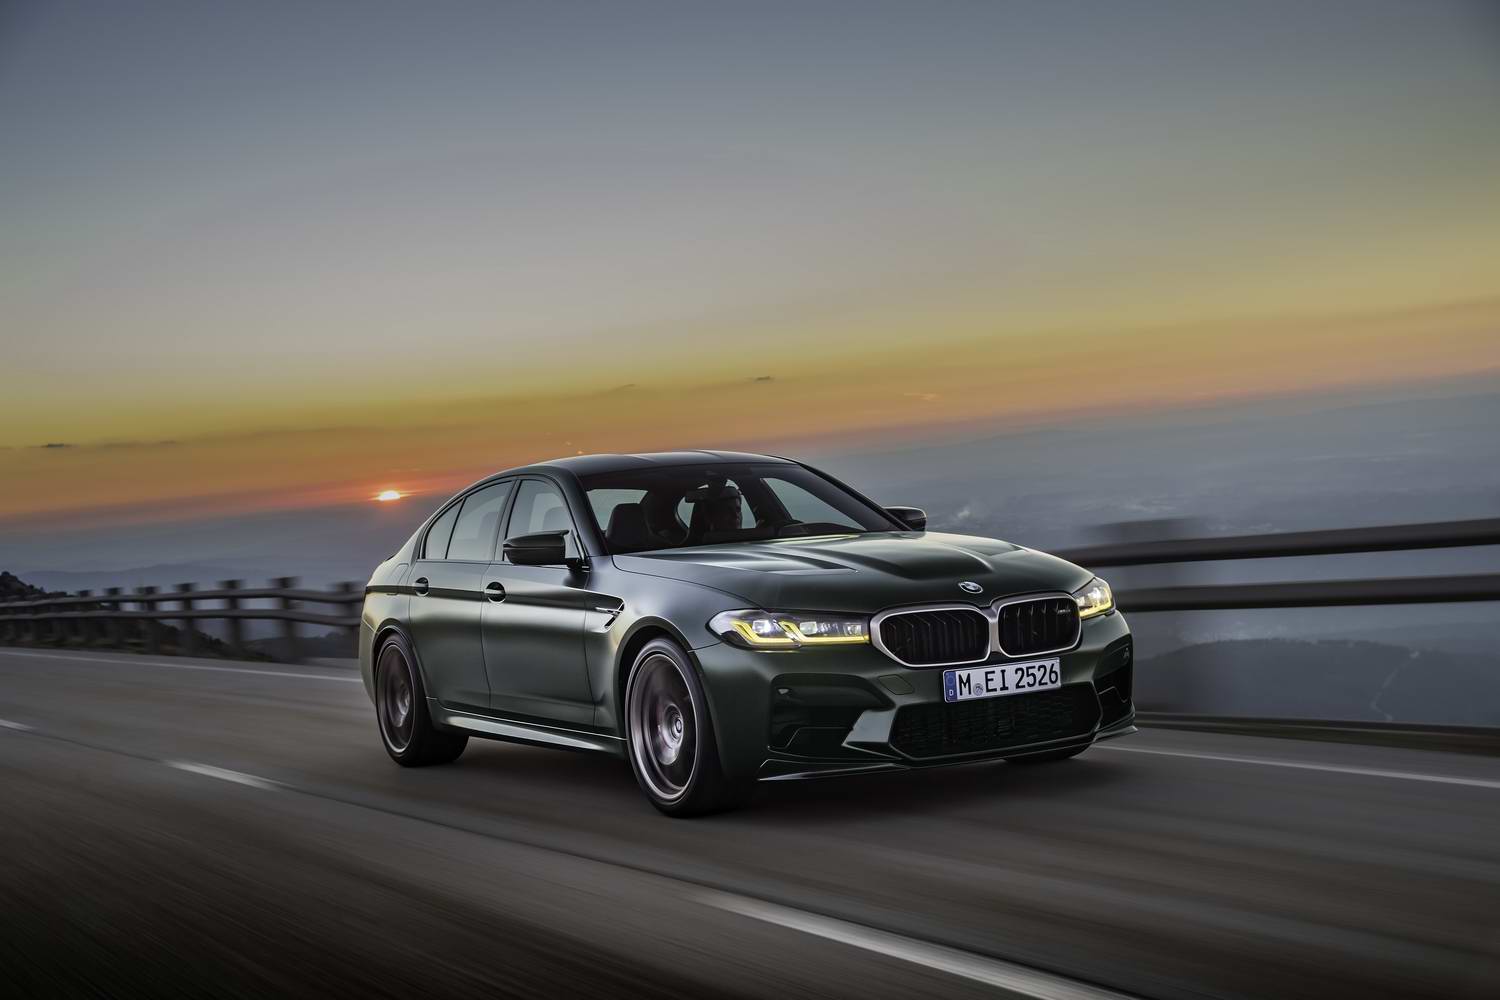 BMW M5 Cars For Sale in Ireland